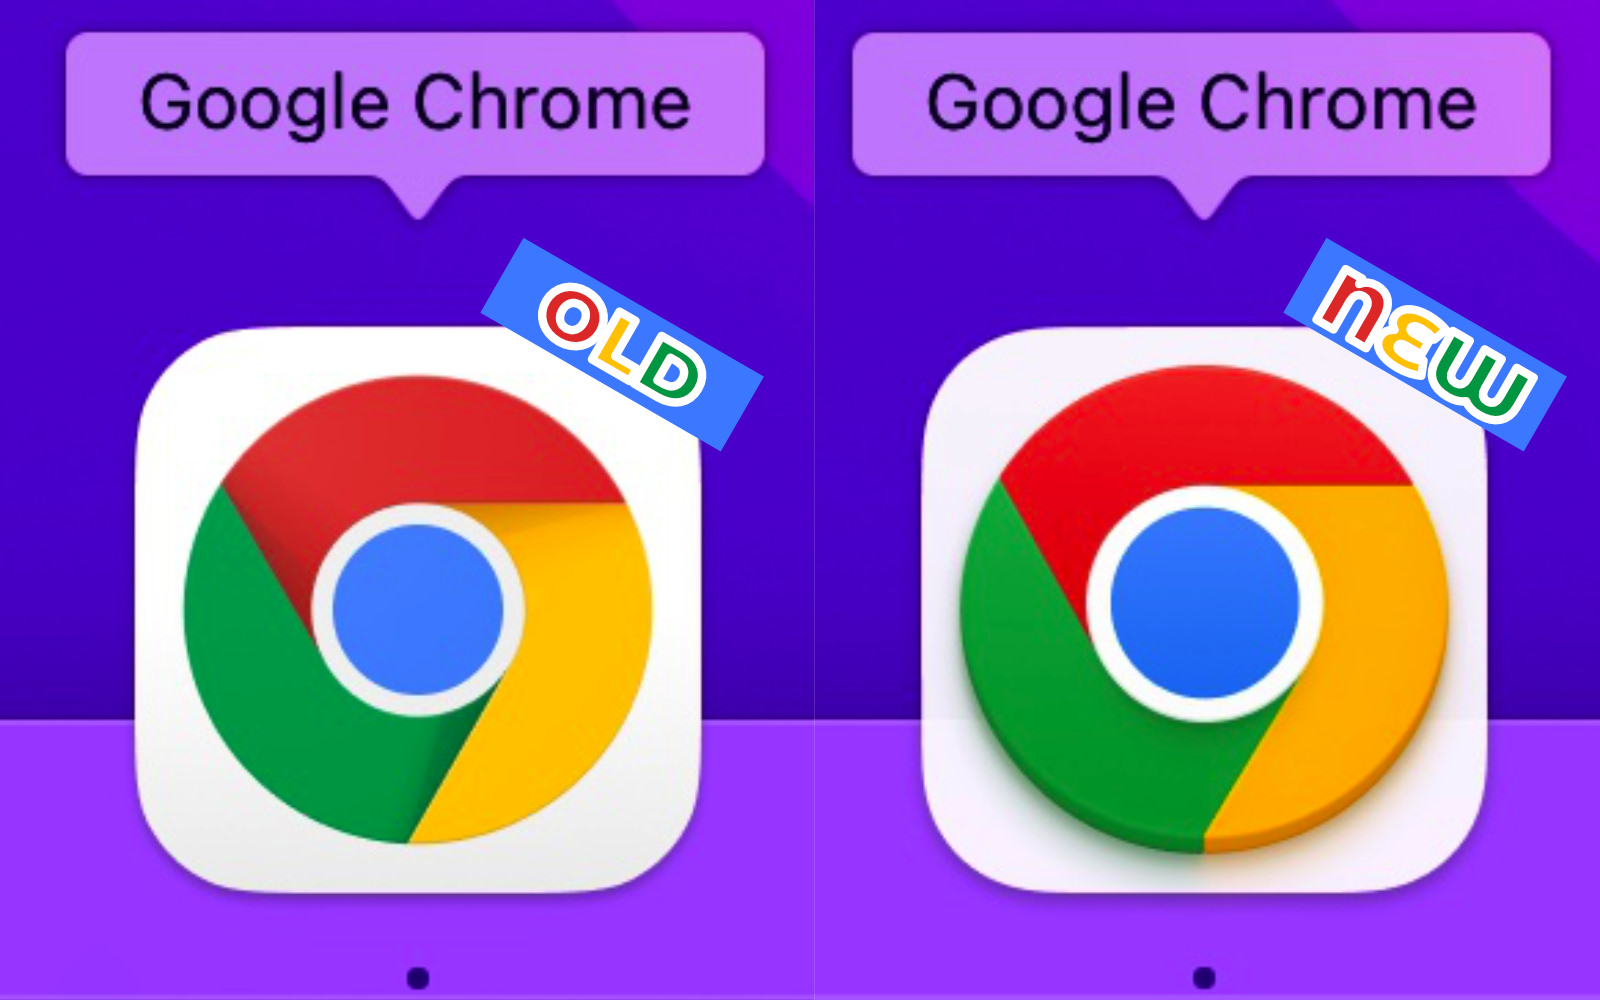 Google Chrome 100 old and new logo